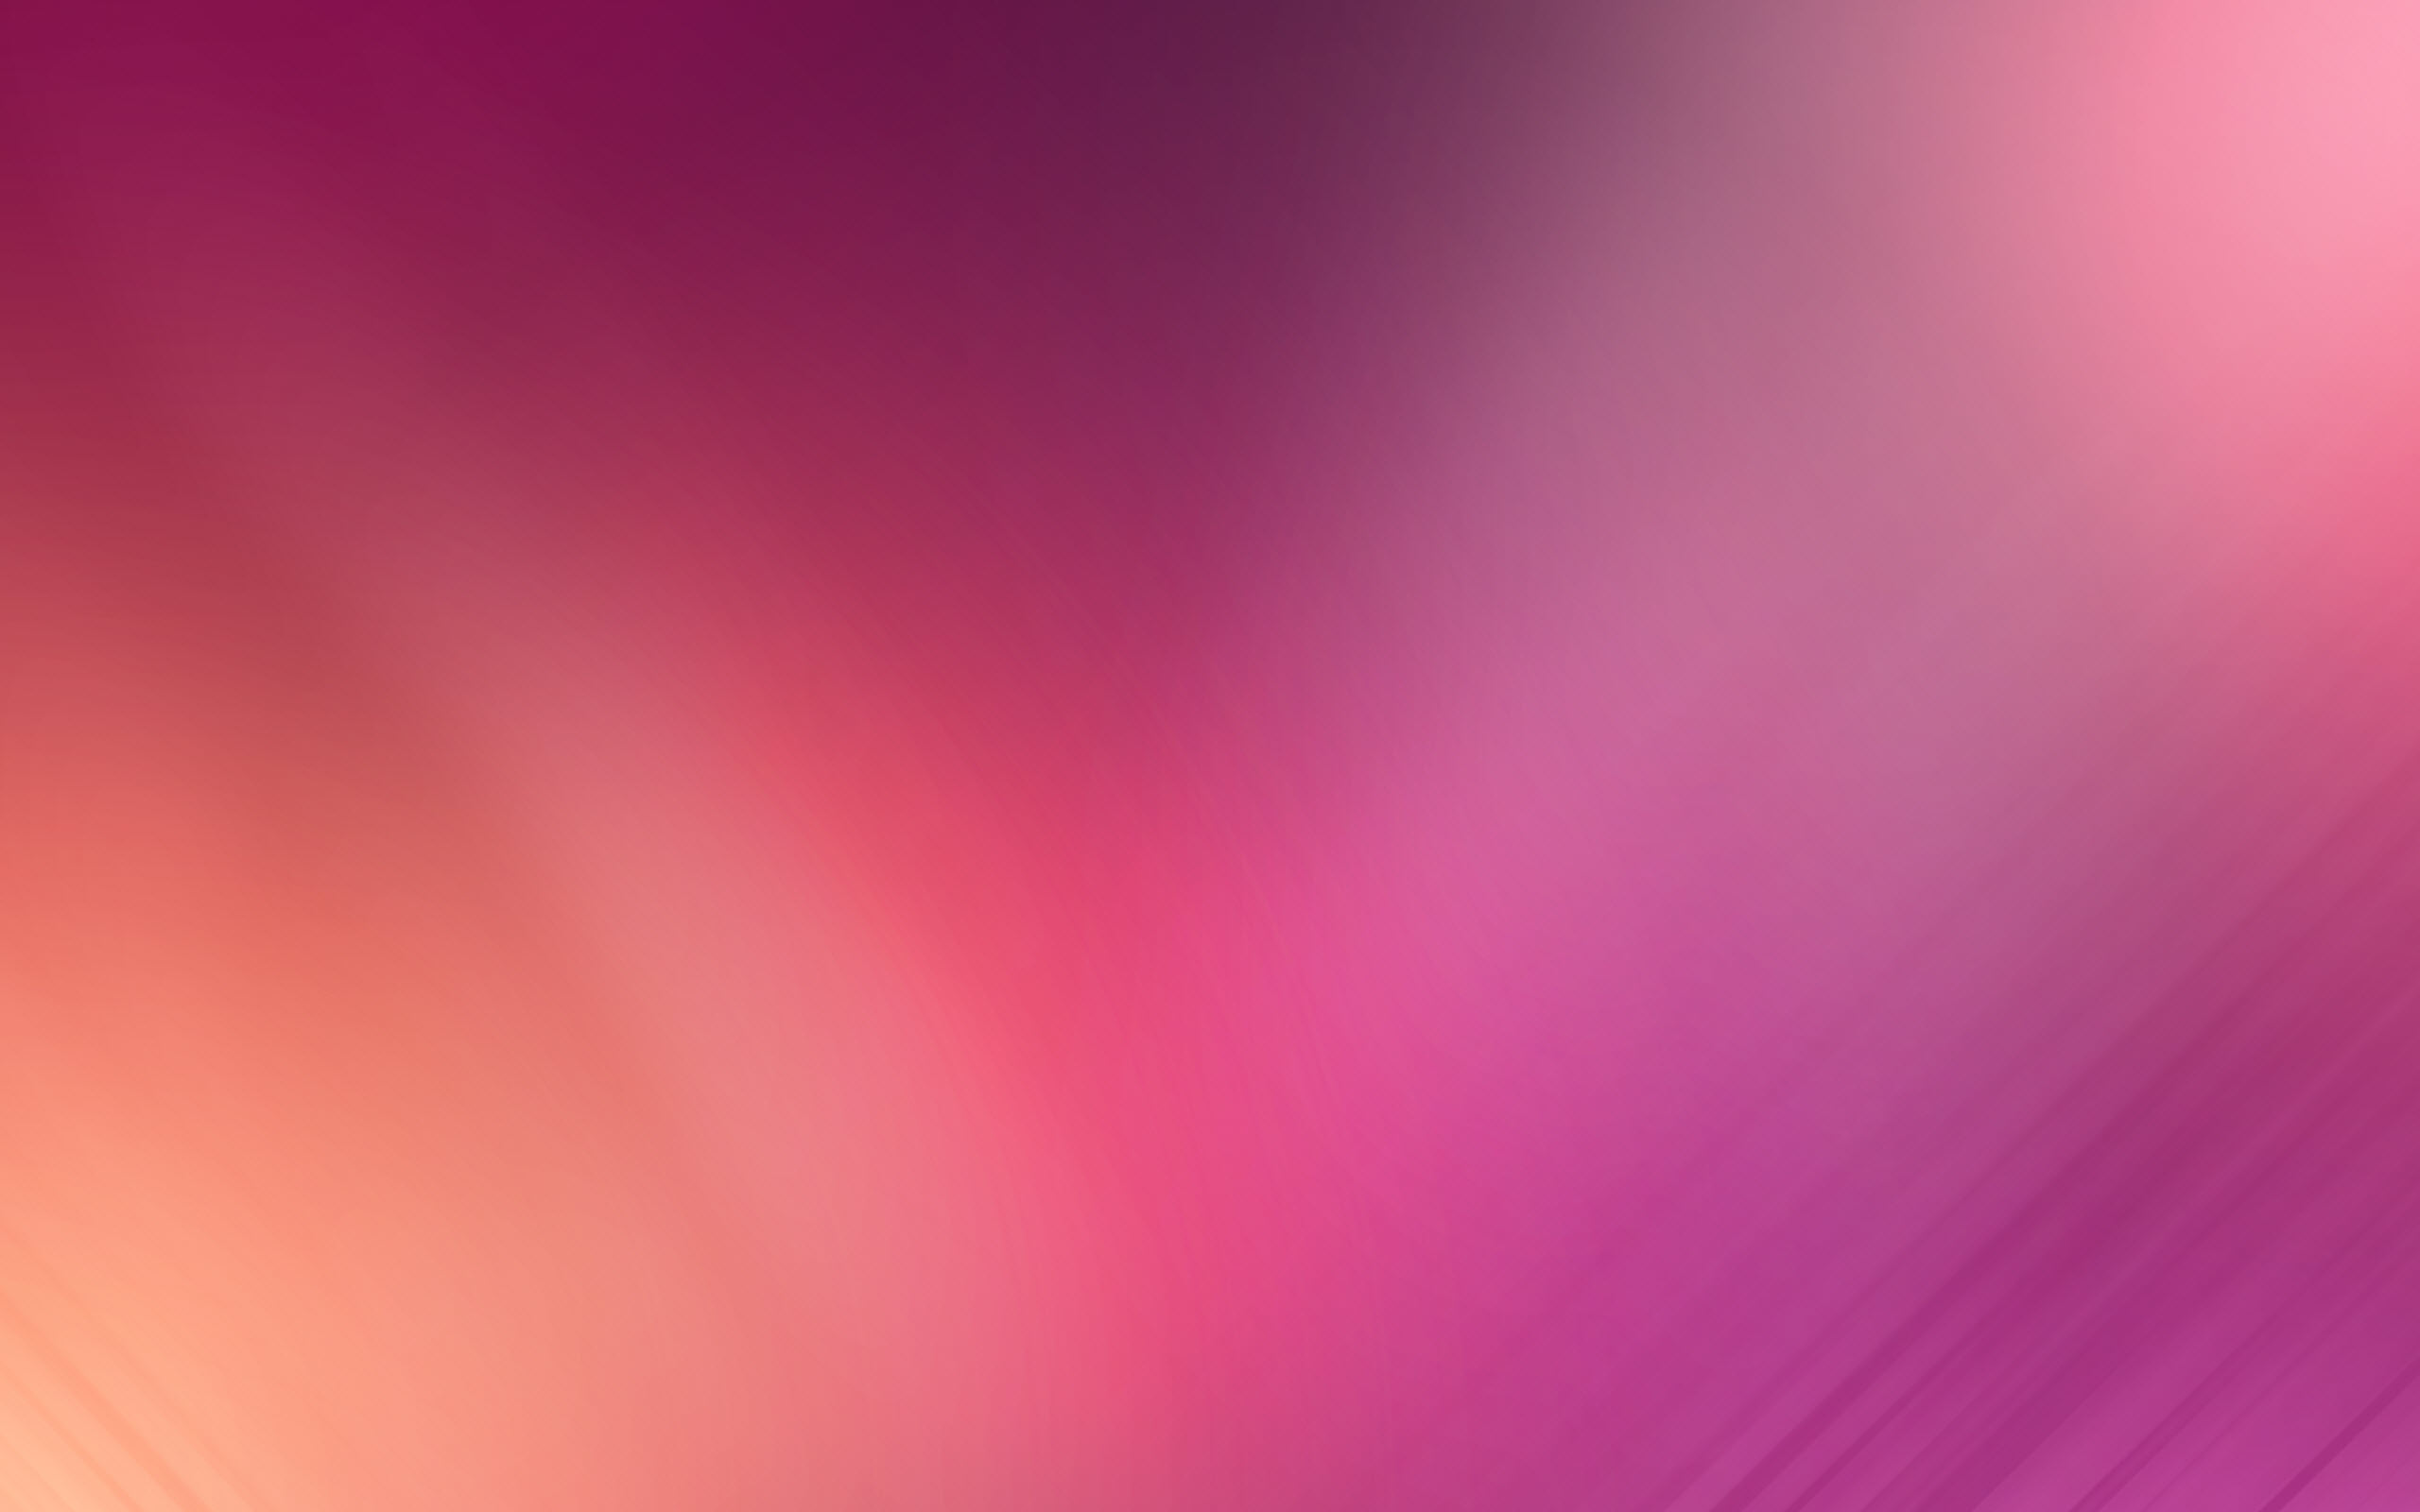 Pink Wallpaper   Cool Pink Background   2560x1600   Download HD